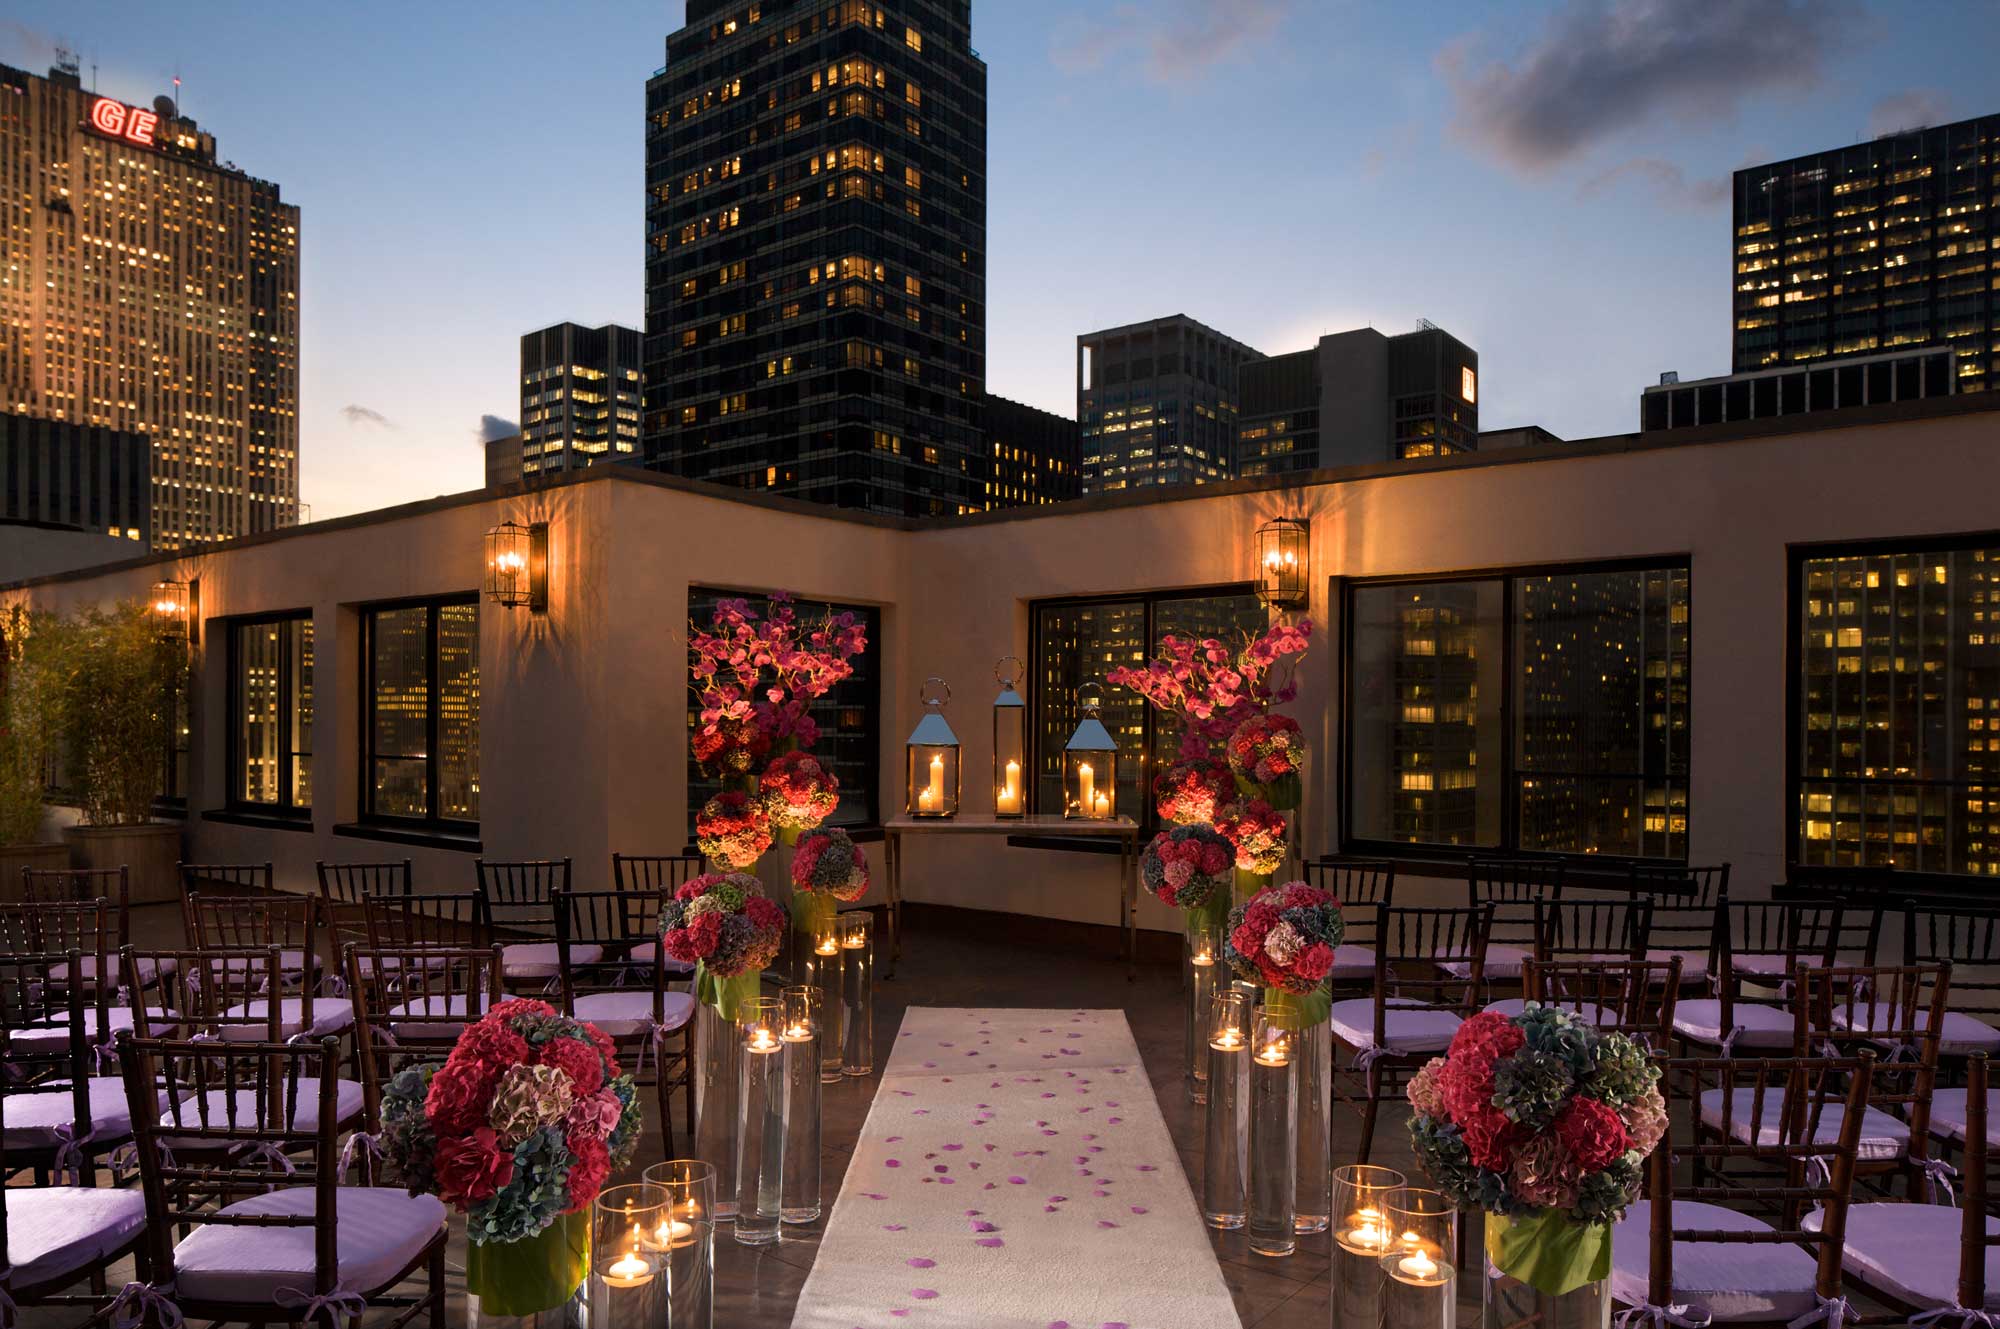 Destination Weddings Venues With Best Views | Unique Places to Get Married | Best Wedding Resorts | The Peninsula New York